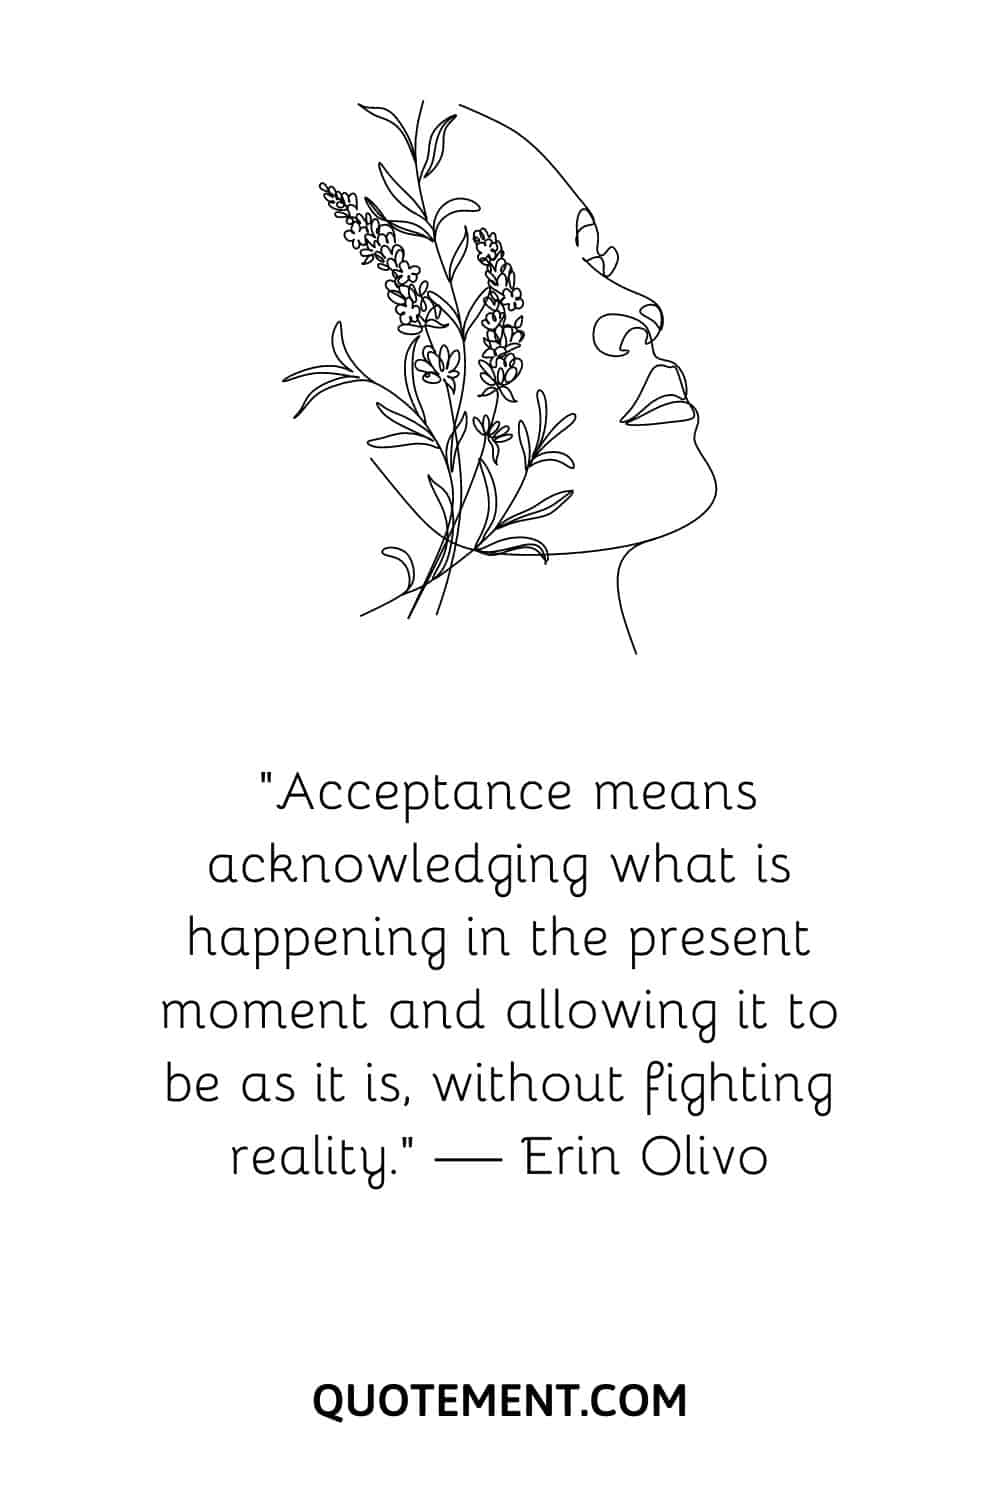 “Acceptance means acknowledging what is happening in the present moment and allowing it to be as it is, without fighting reality.” — Erin Olivo